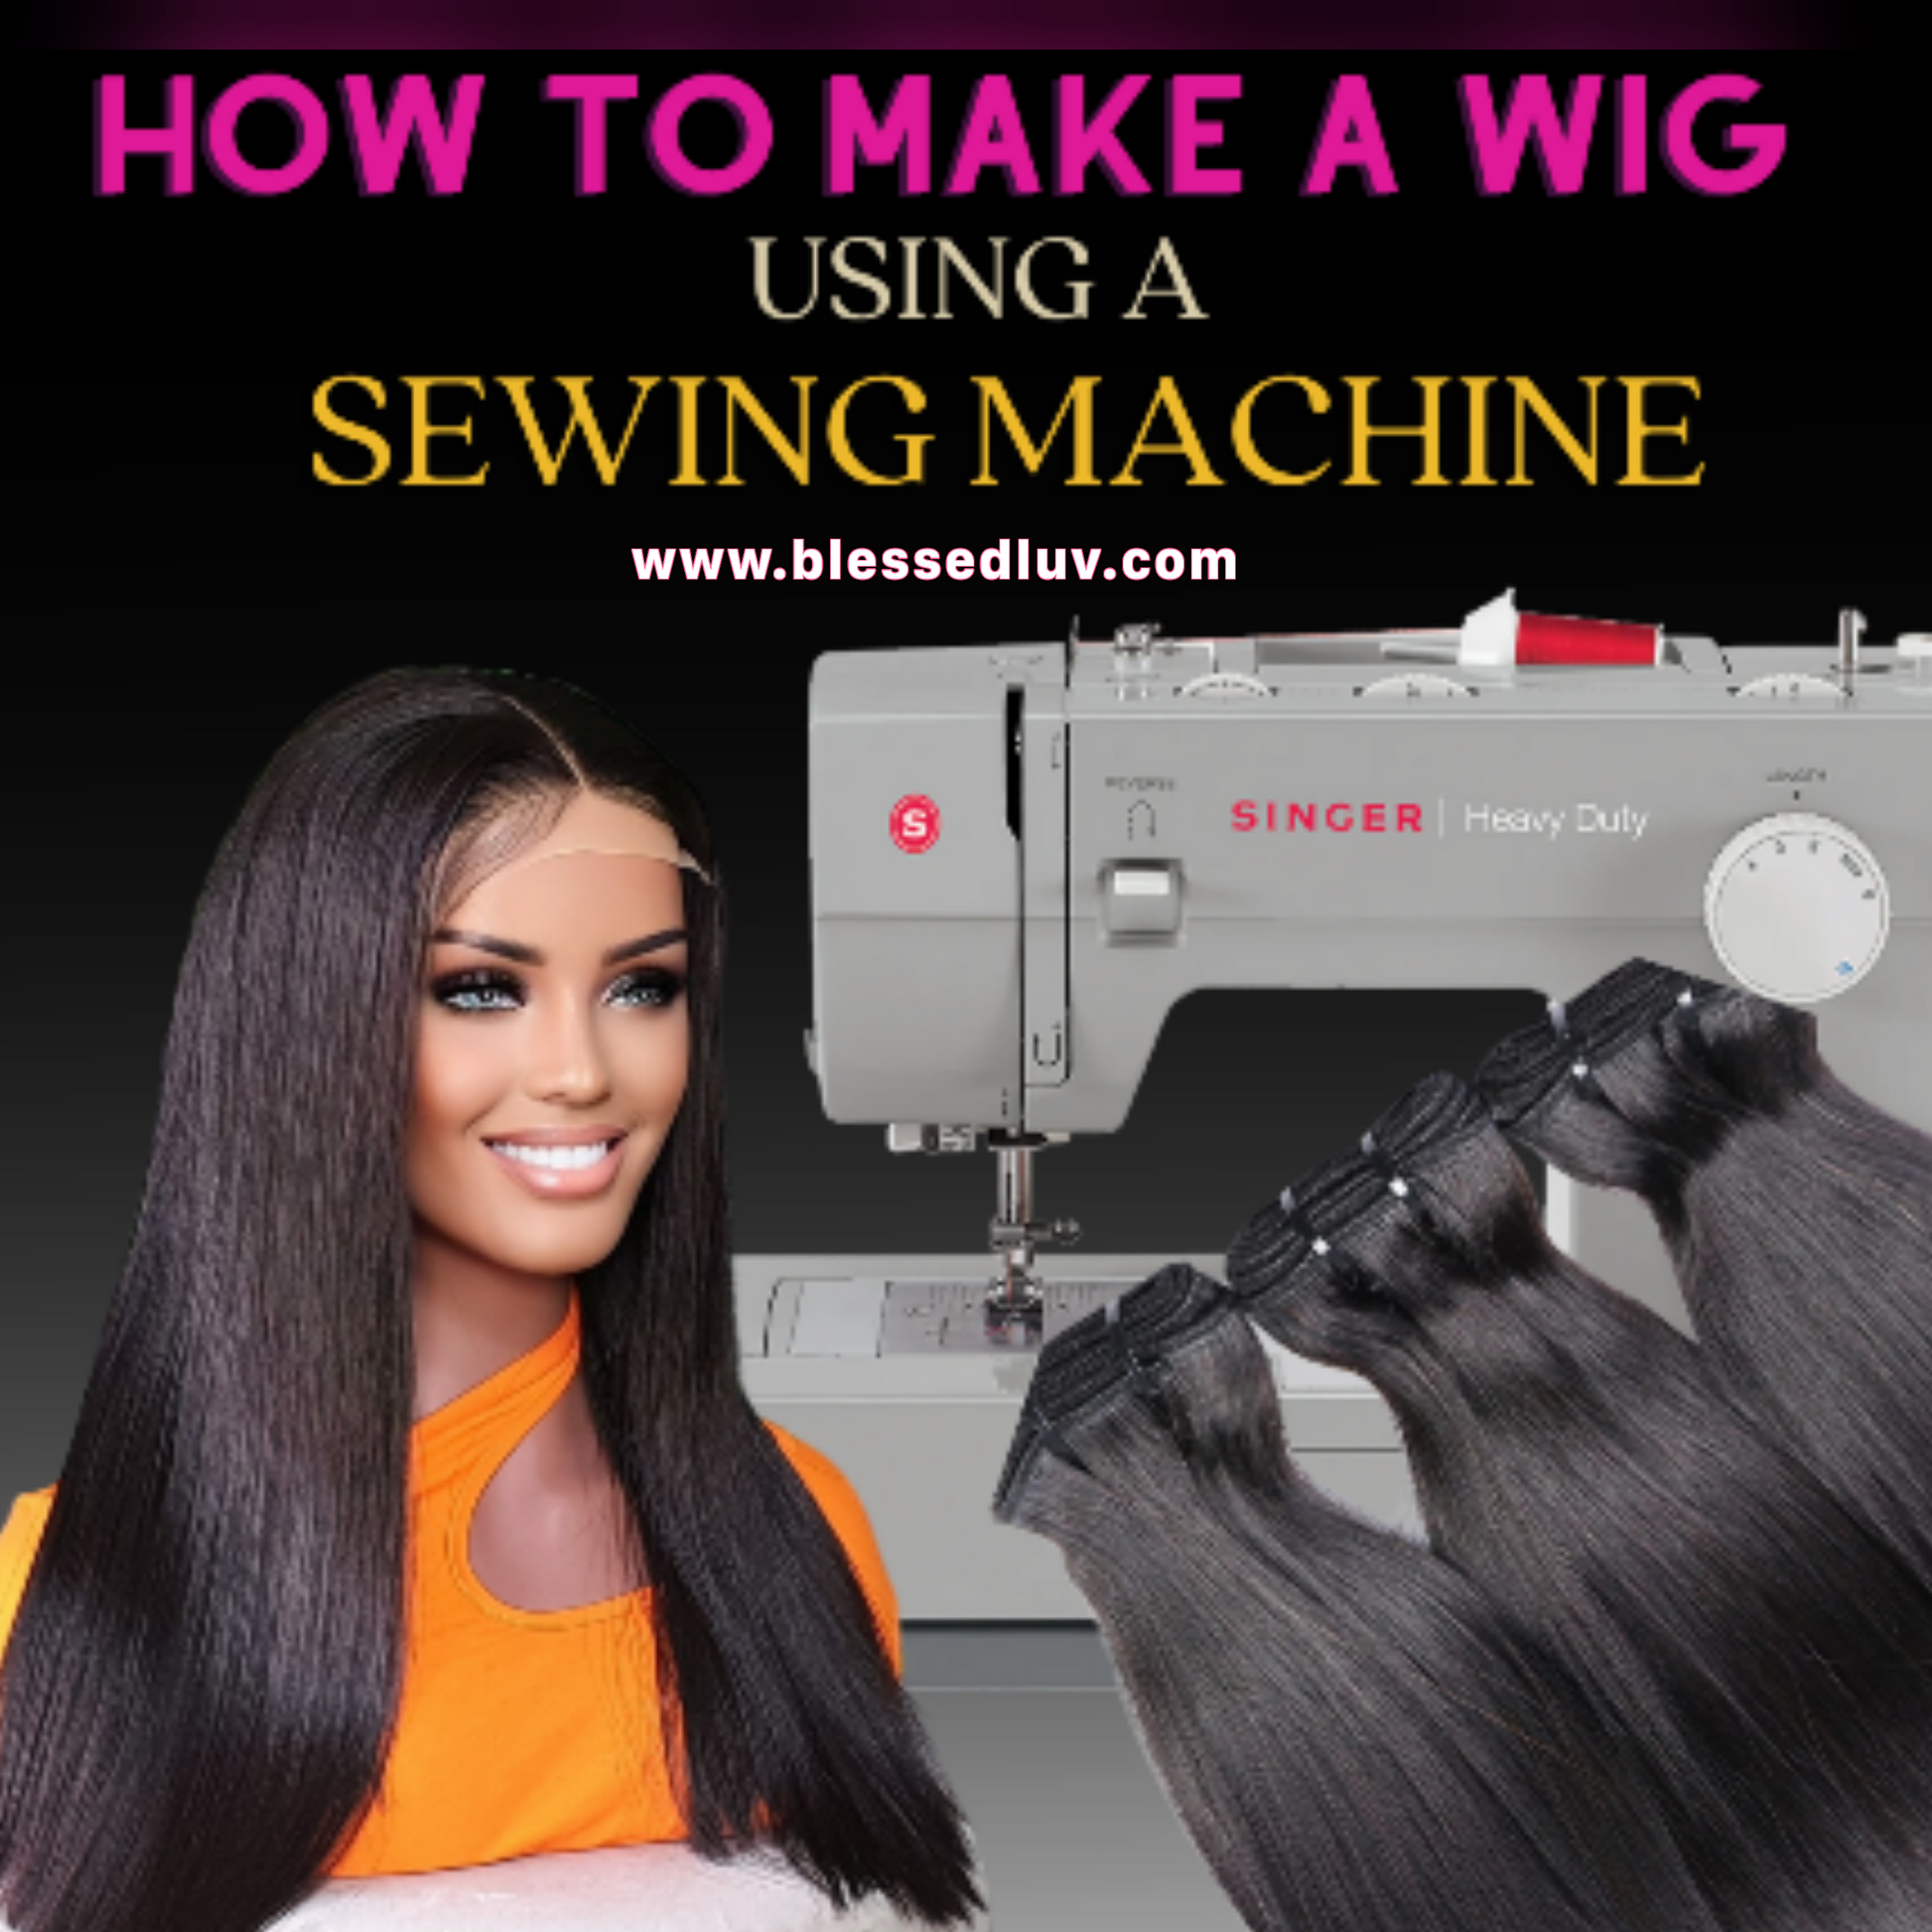 Wig Making Secrets Unveiled: Learn to Craft Professional Lace Closure Wigs at Home-Online Course-www.blessedluv.com-Brazilianweave.com